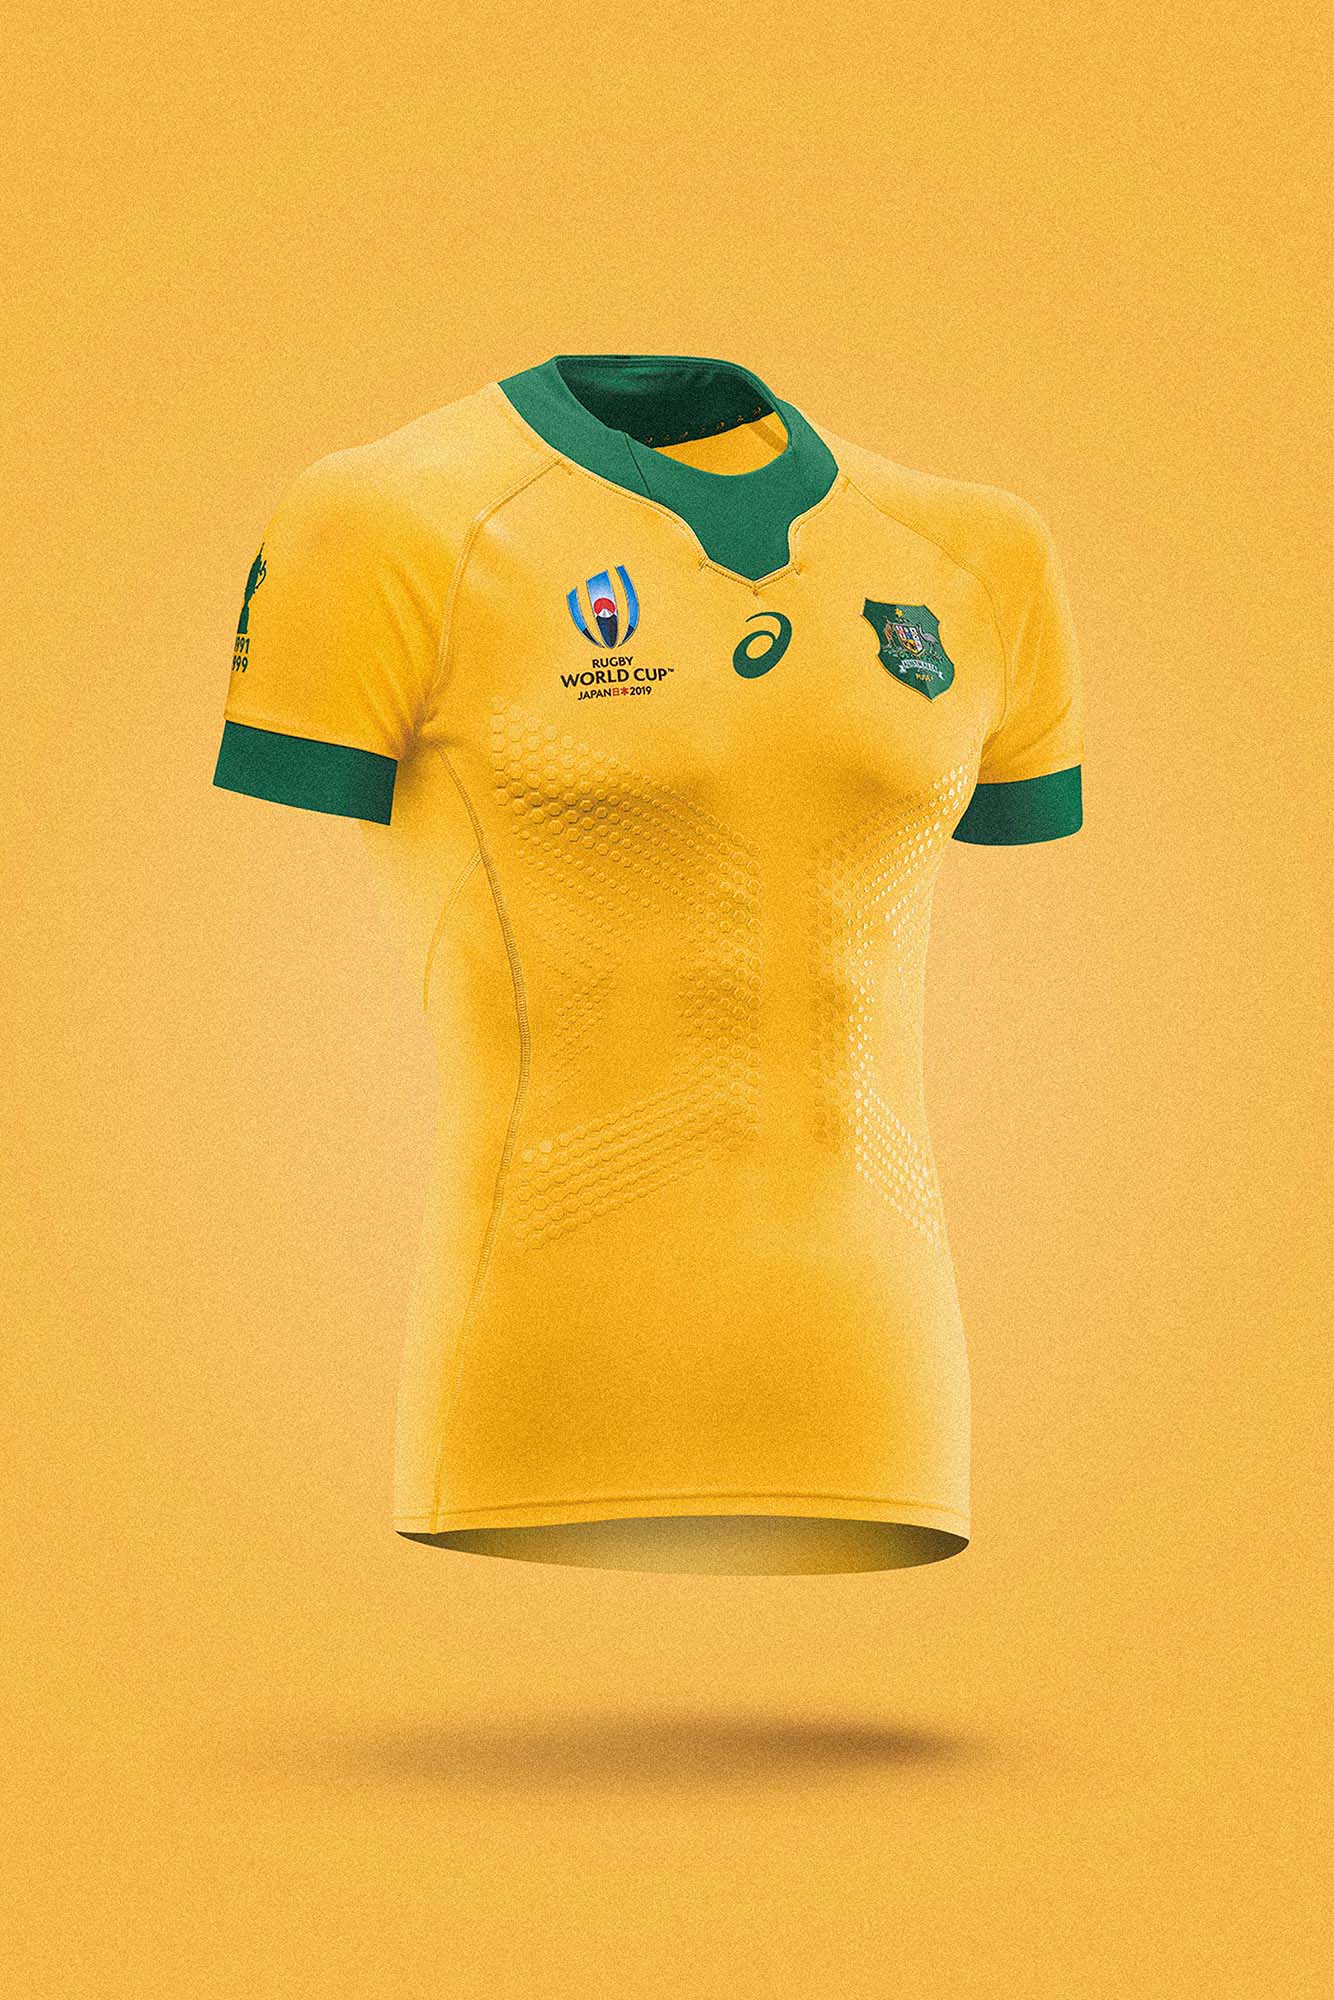 Commercial Product Photography Of World Cup Australian Jersey captured for ASICS Australia, photographed on a vibrant yellow background